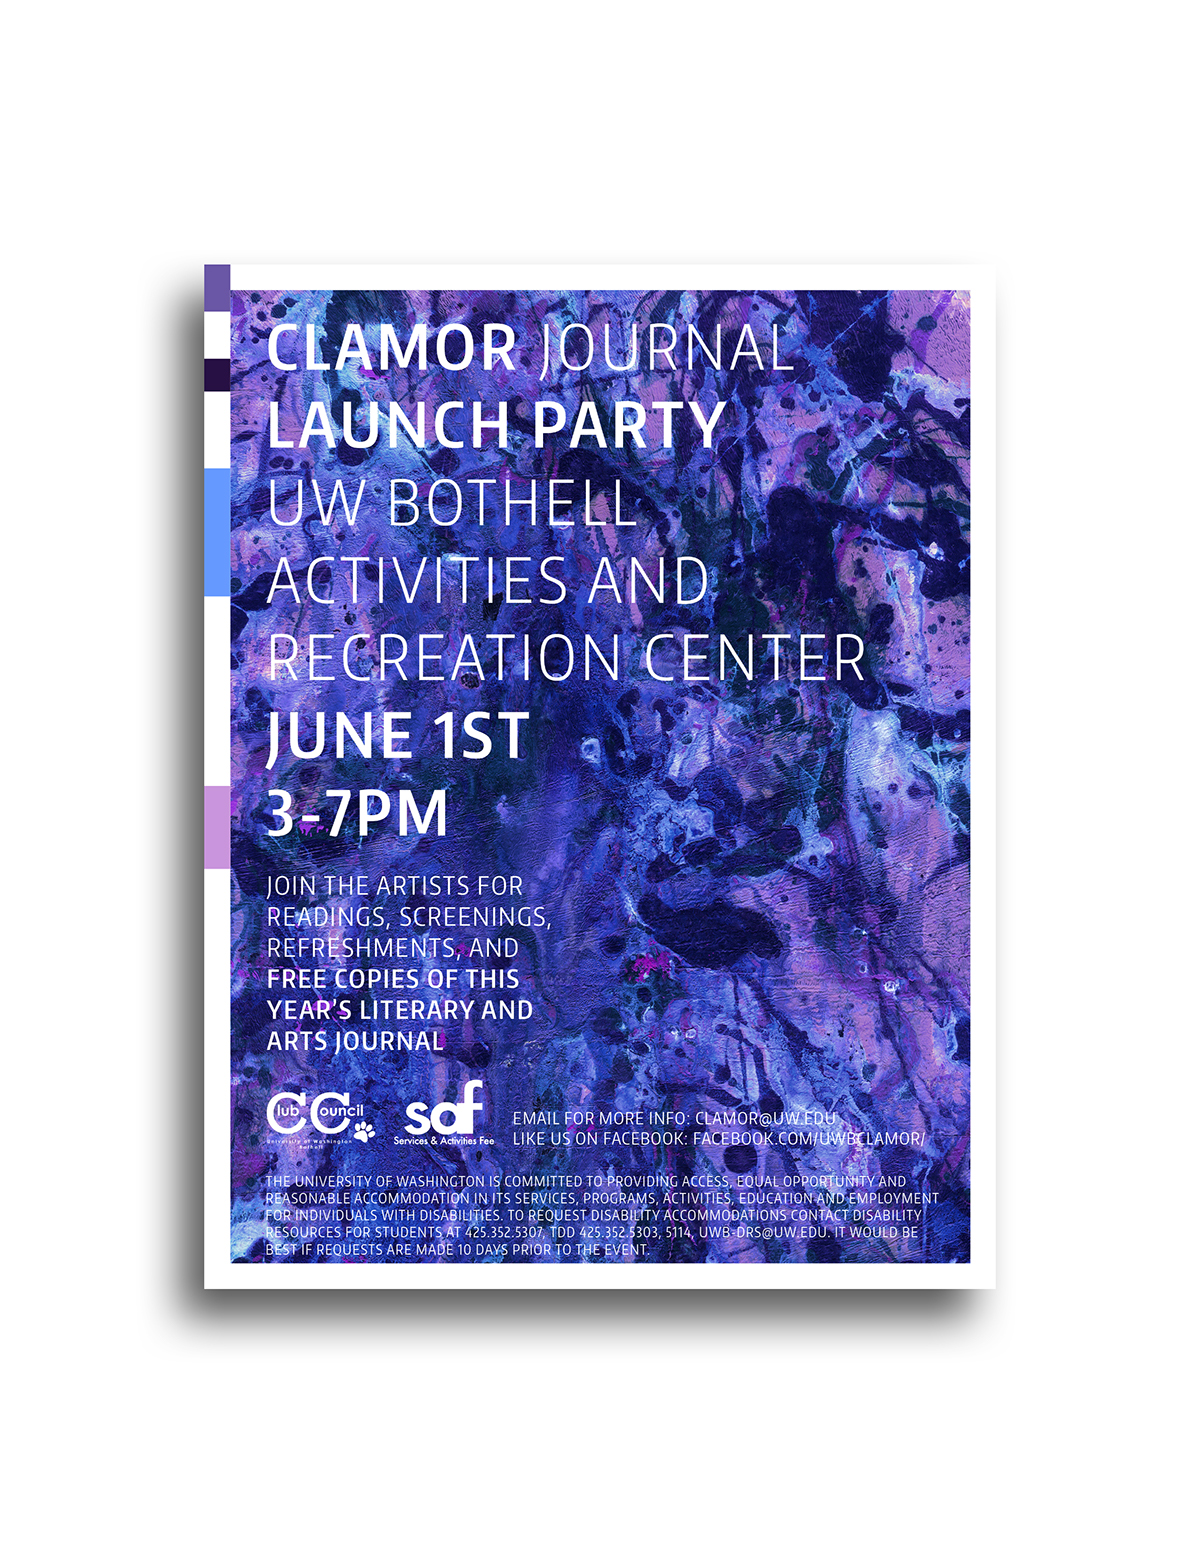 clamor UW uwb university of washington bothell Literary & Arts journal Launch Party miguel jimenez Event Poster poster Poster Design Promotion campus